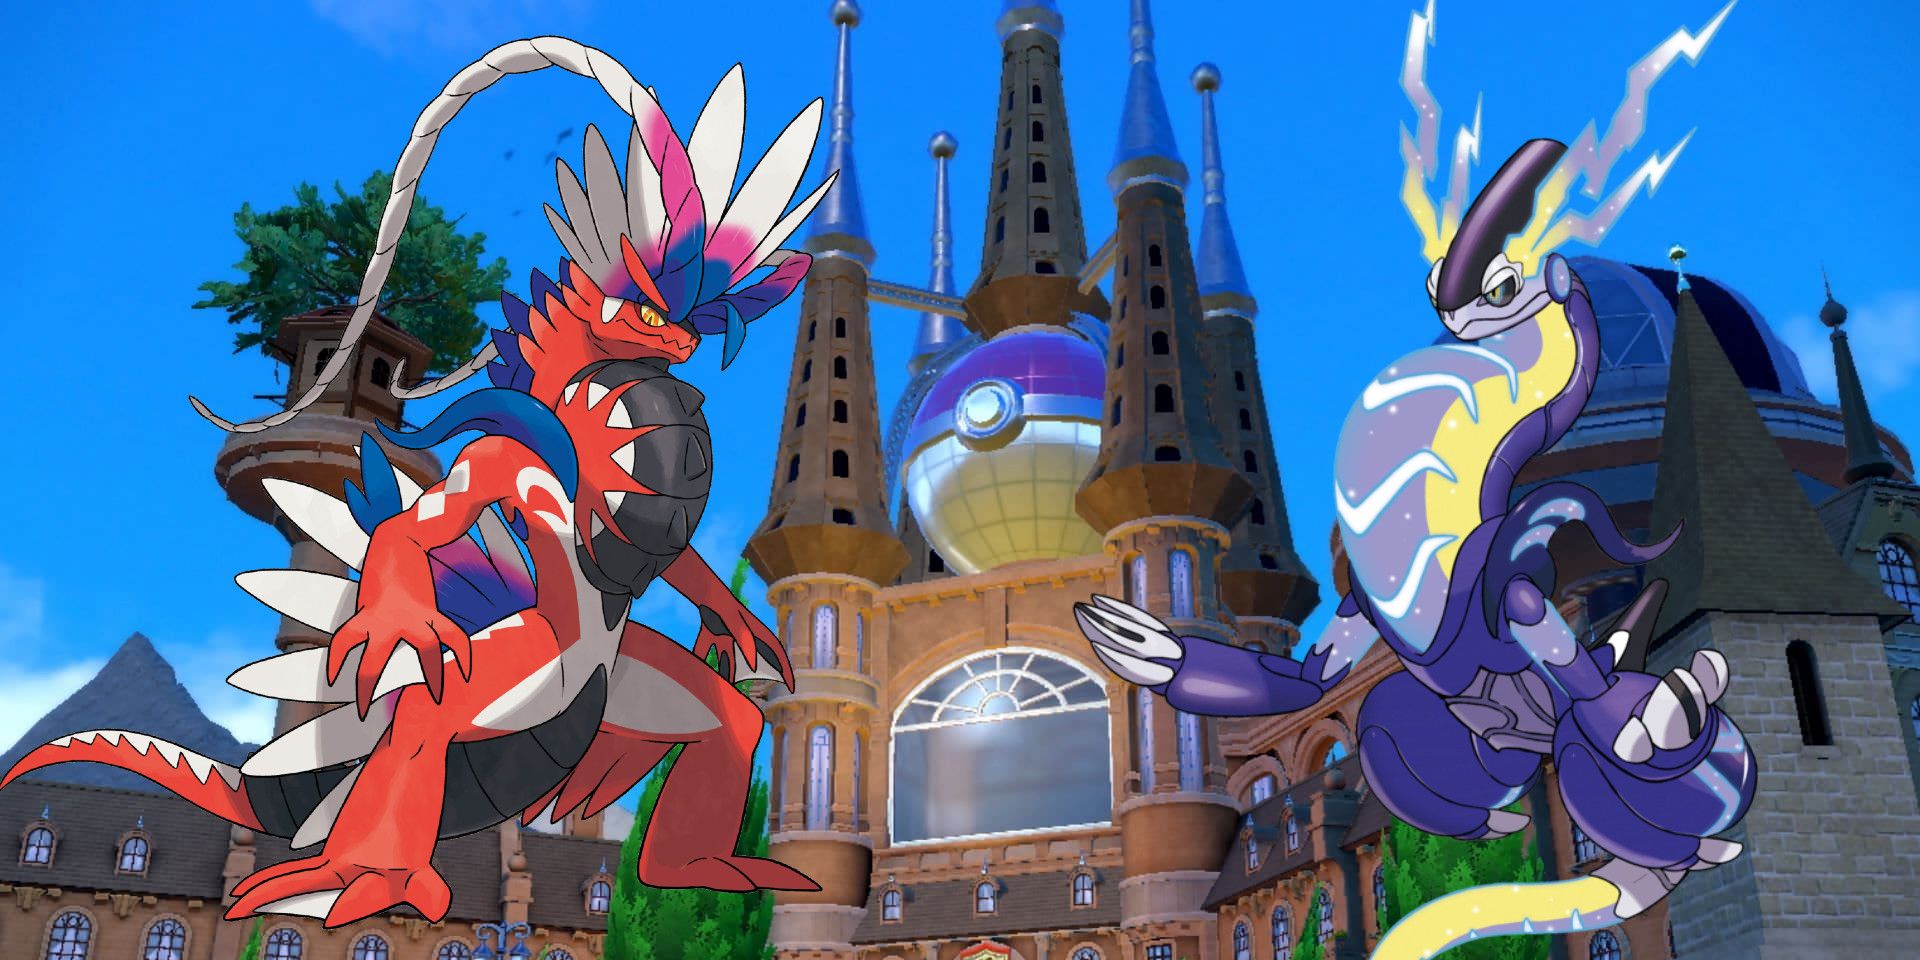 Koraidon and Miraidon from Pokemon Scarlet and Violet over an image of the school from the games